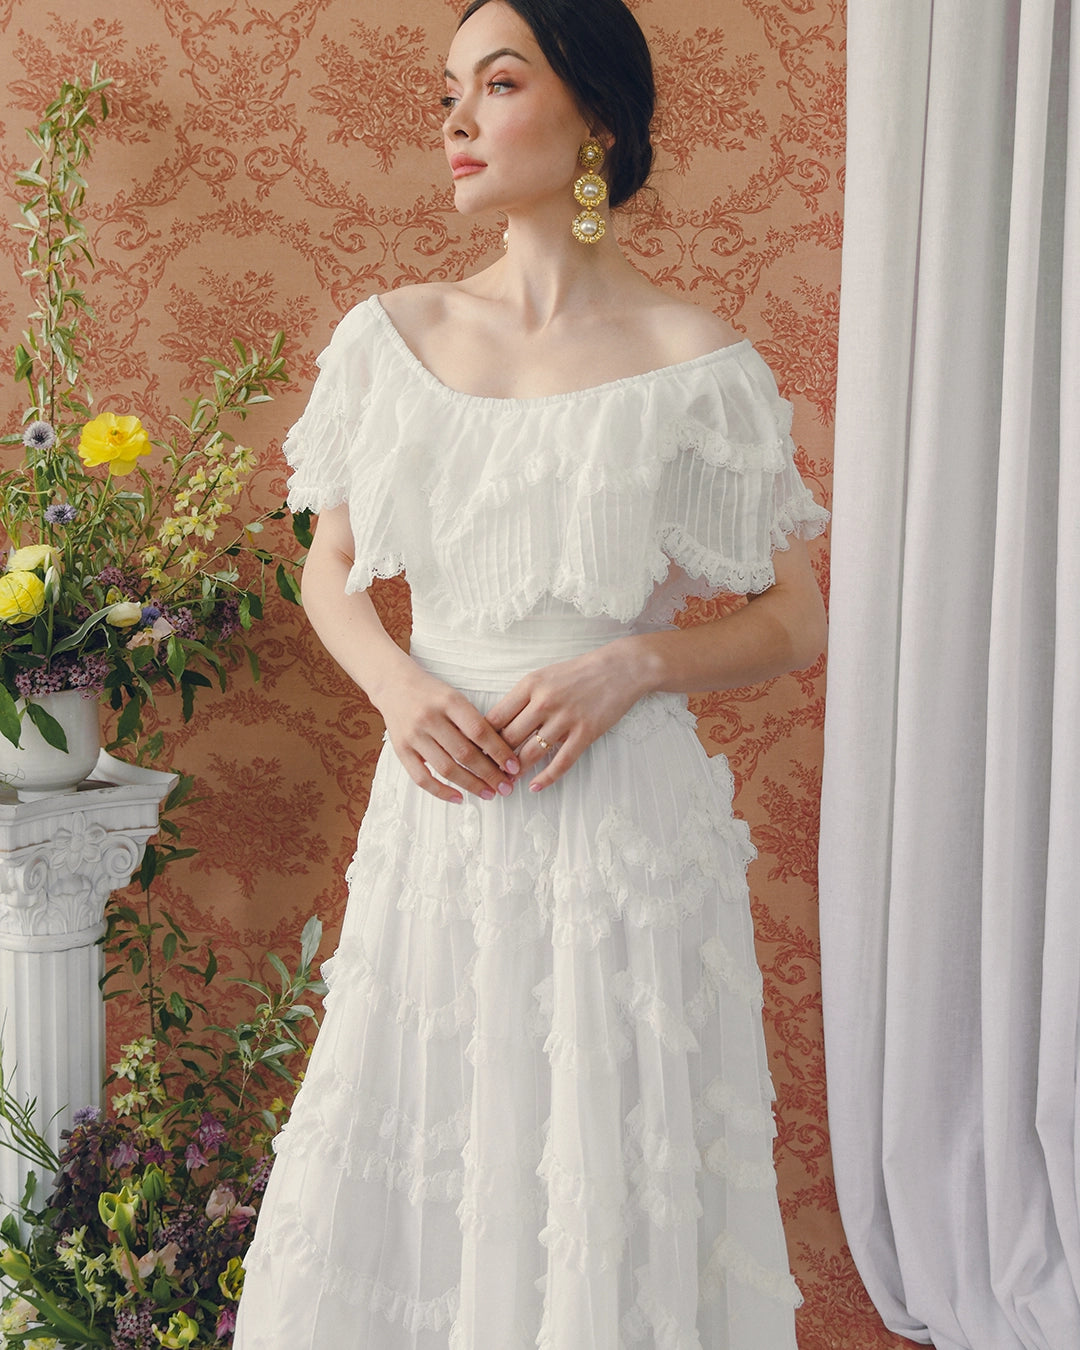 VINTAGE 1950s OFF-THE-SHOULDER PINTUCKED DRESS WITH SCALLOPED LACE TRIM